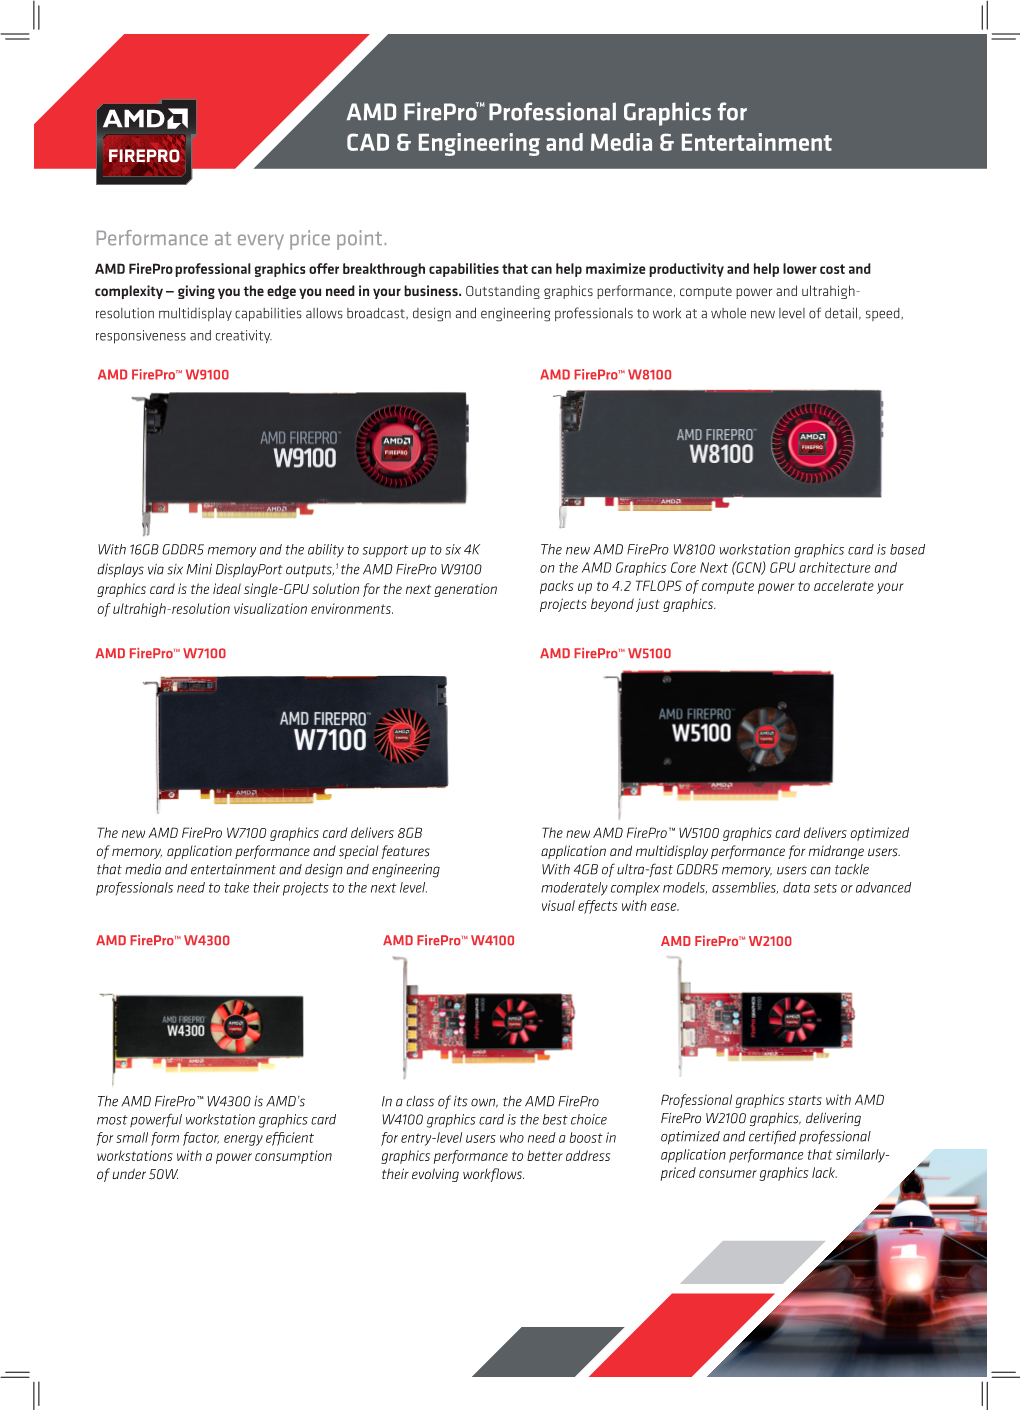 AMD Firepro™Professional Graphics for CAD & Engineering and Media & Entertainment